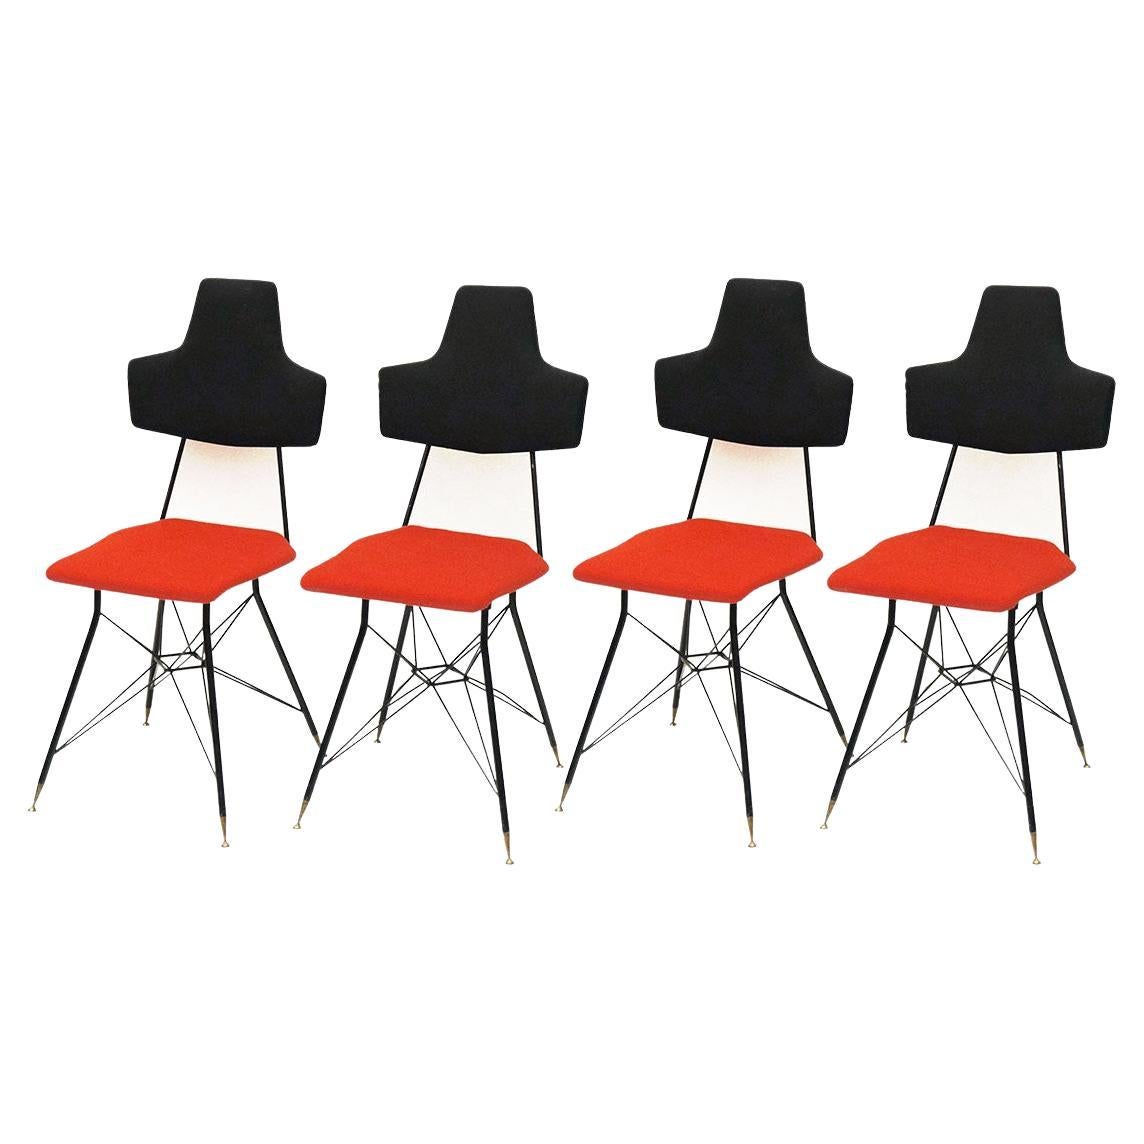 Set of Four talian Black & Red Dining Chairs, 1950s For Sale